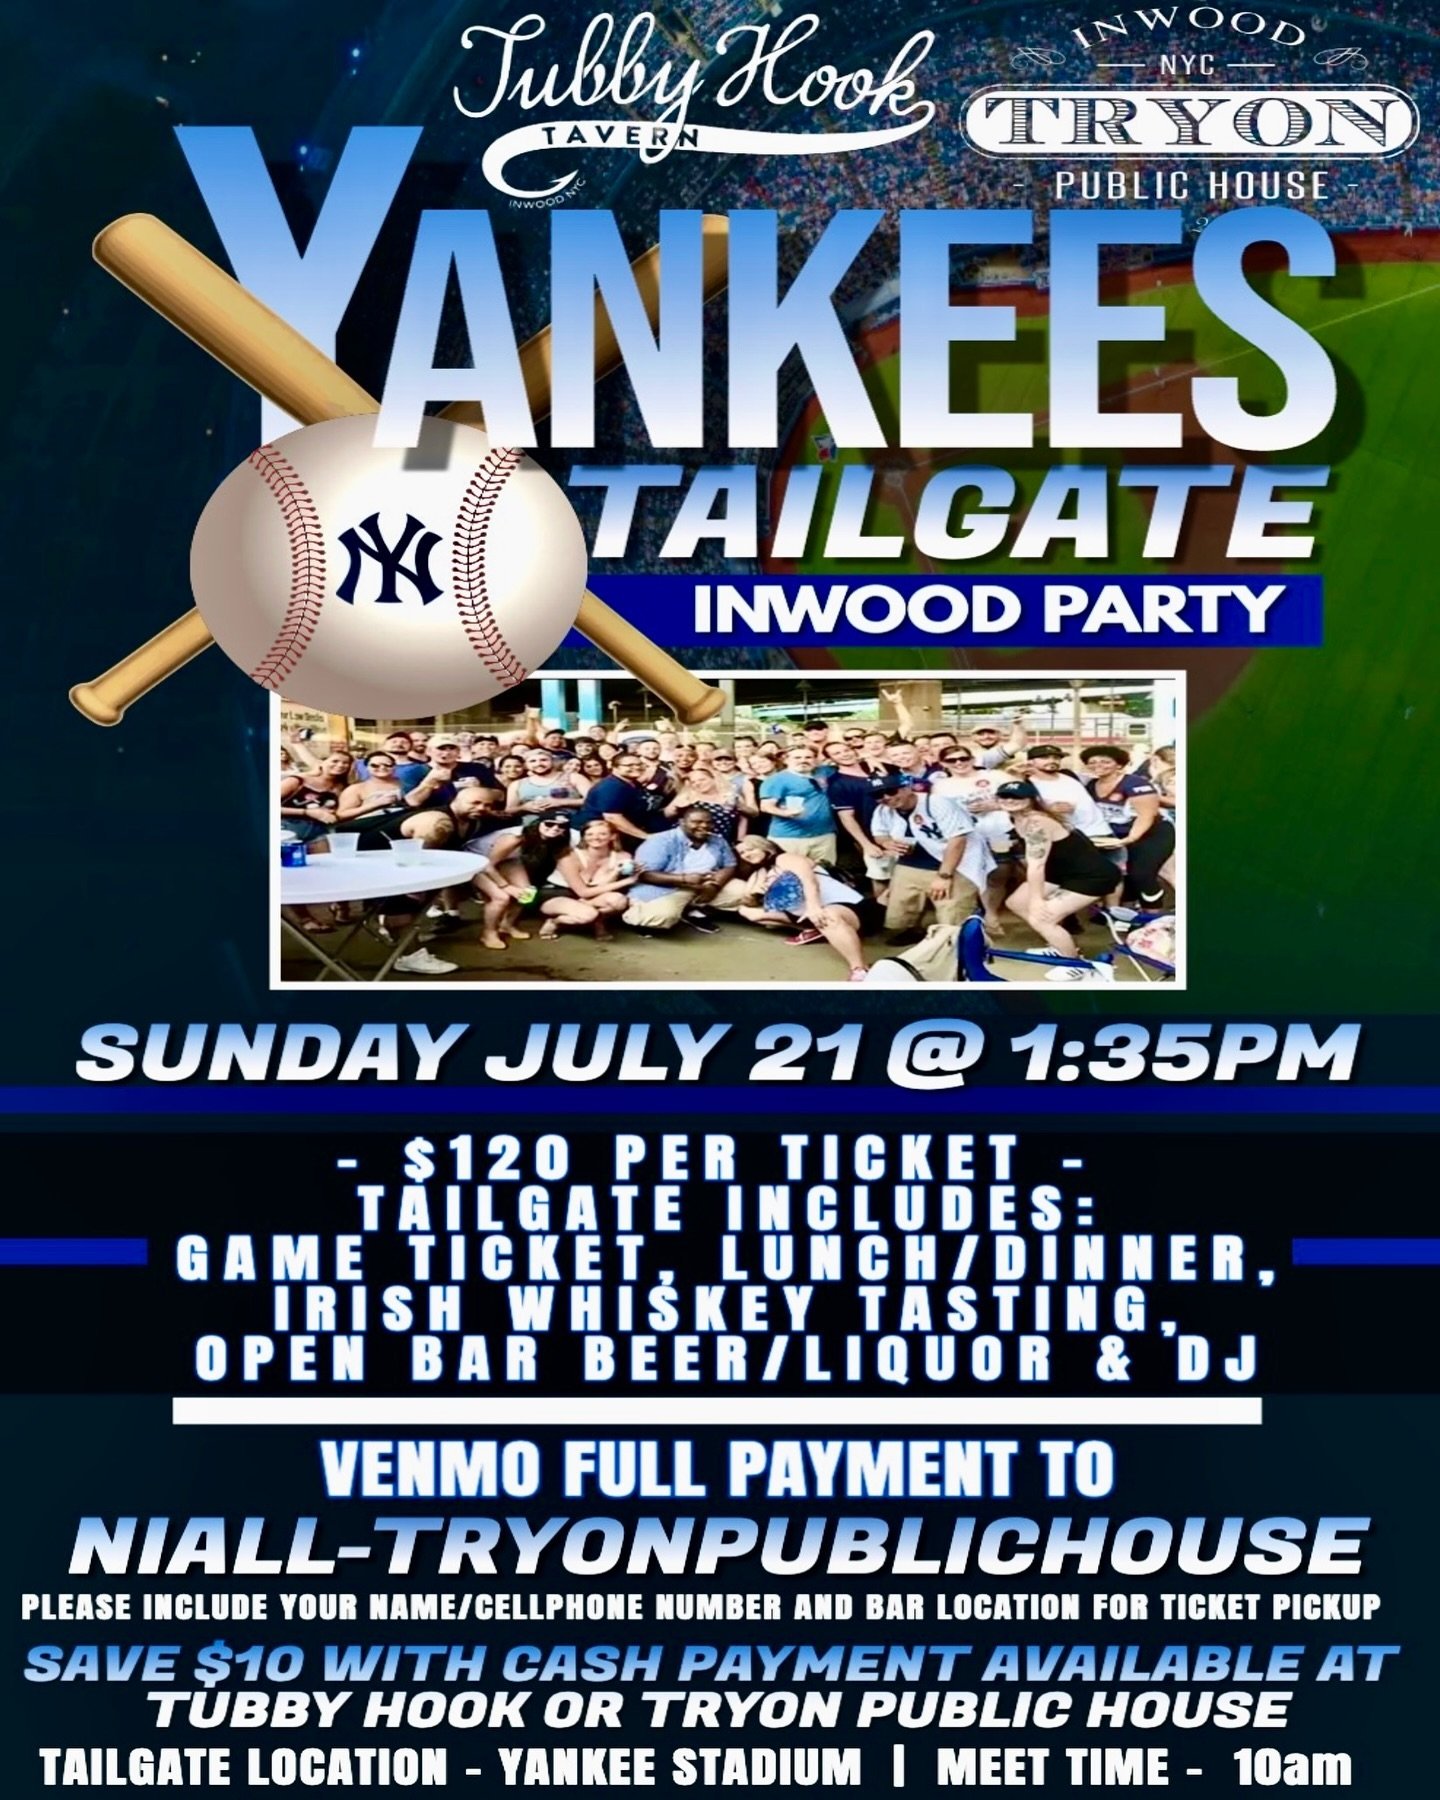 ⚾️ Get ready for the summers ultimate Yankees Tailgate Party on July 21st!🍻

Join us for a day of baseball, booze, as we celebrate our beloved Yankees in style! ⚾️🍺

🌭🍔 Enjoy an all-you-can-eat lunch/dinner spread featuring all your tailgate favo